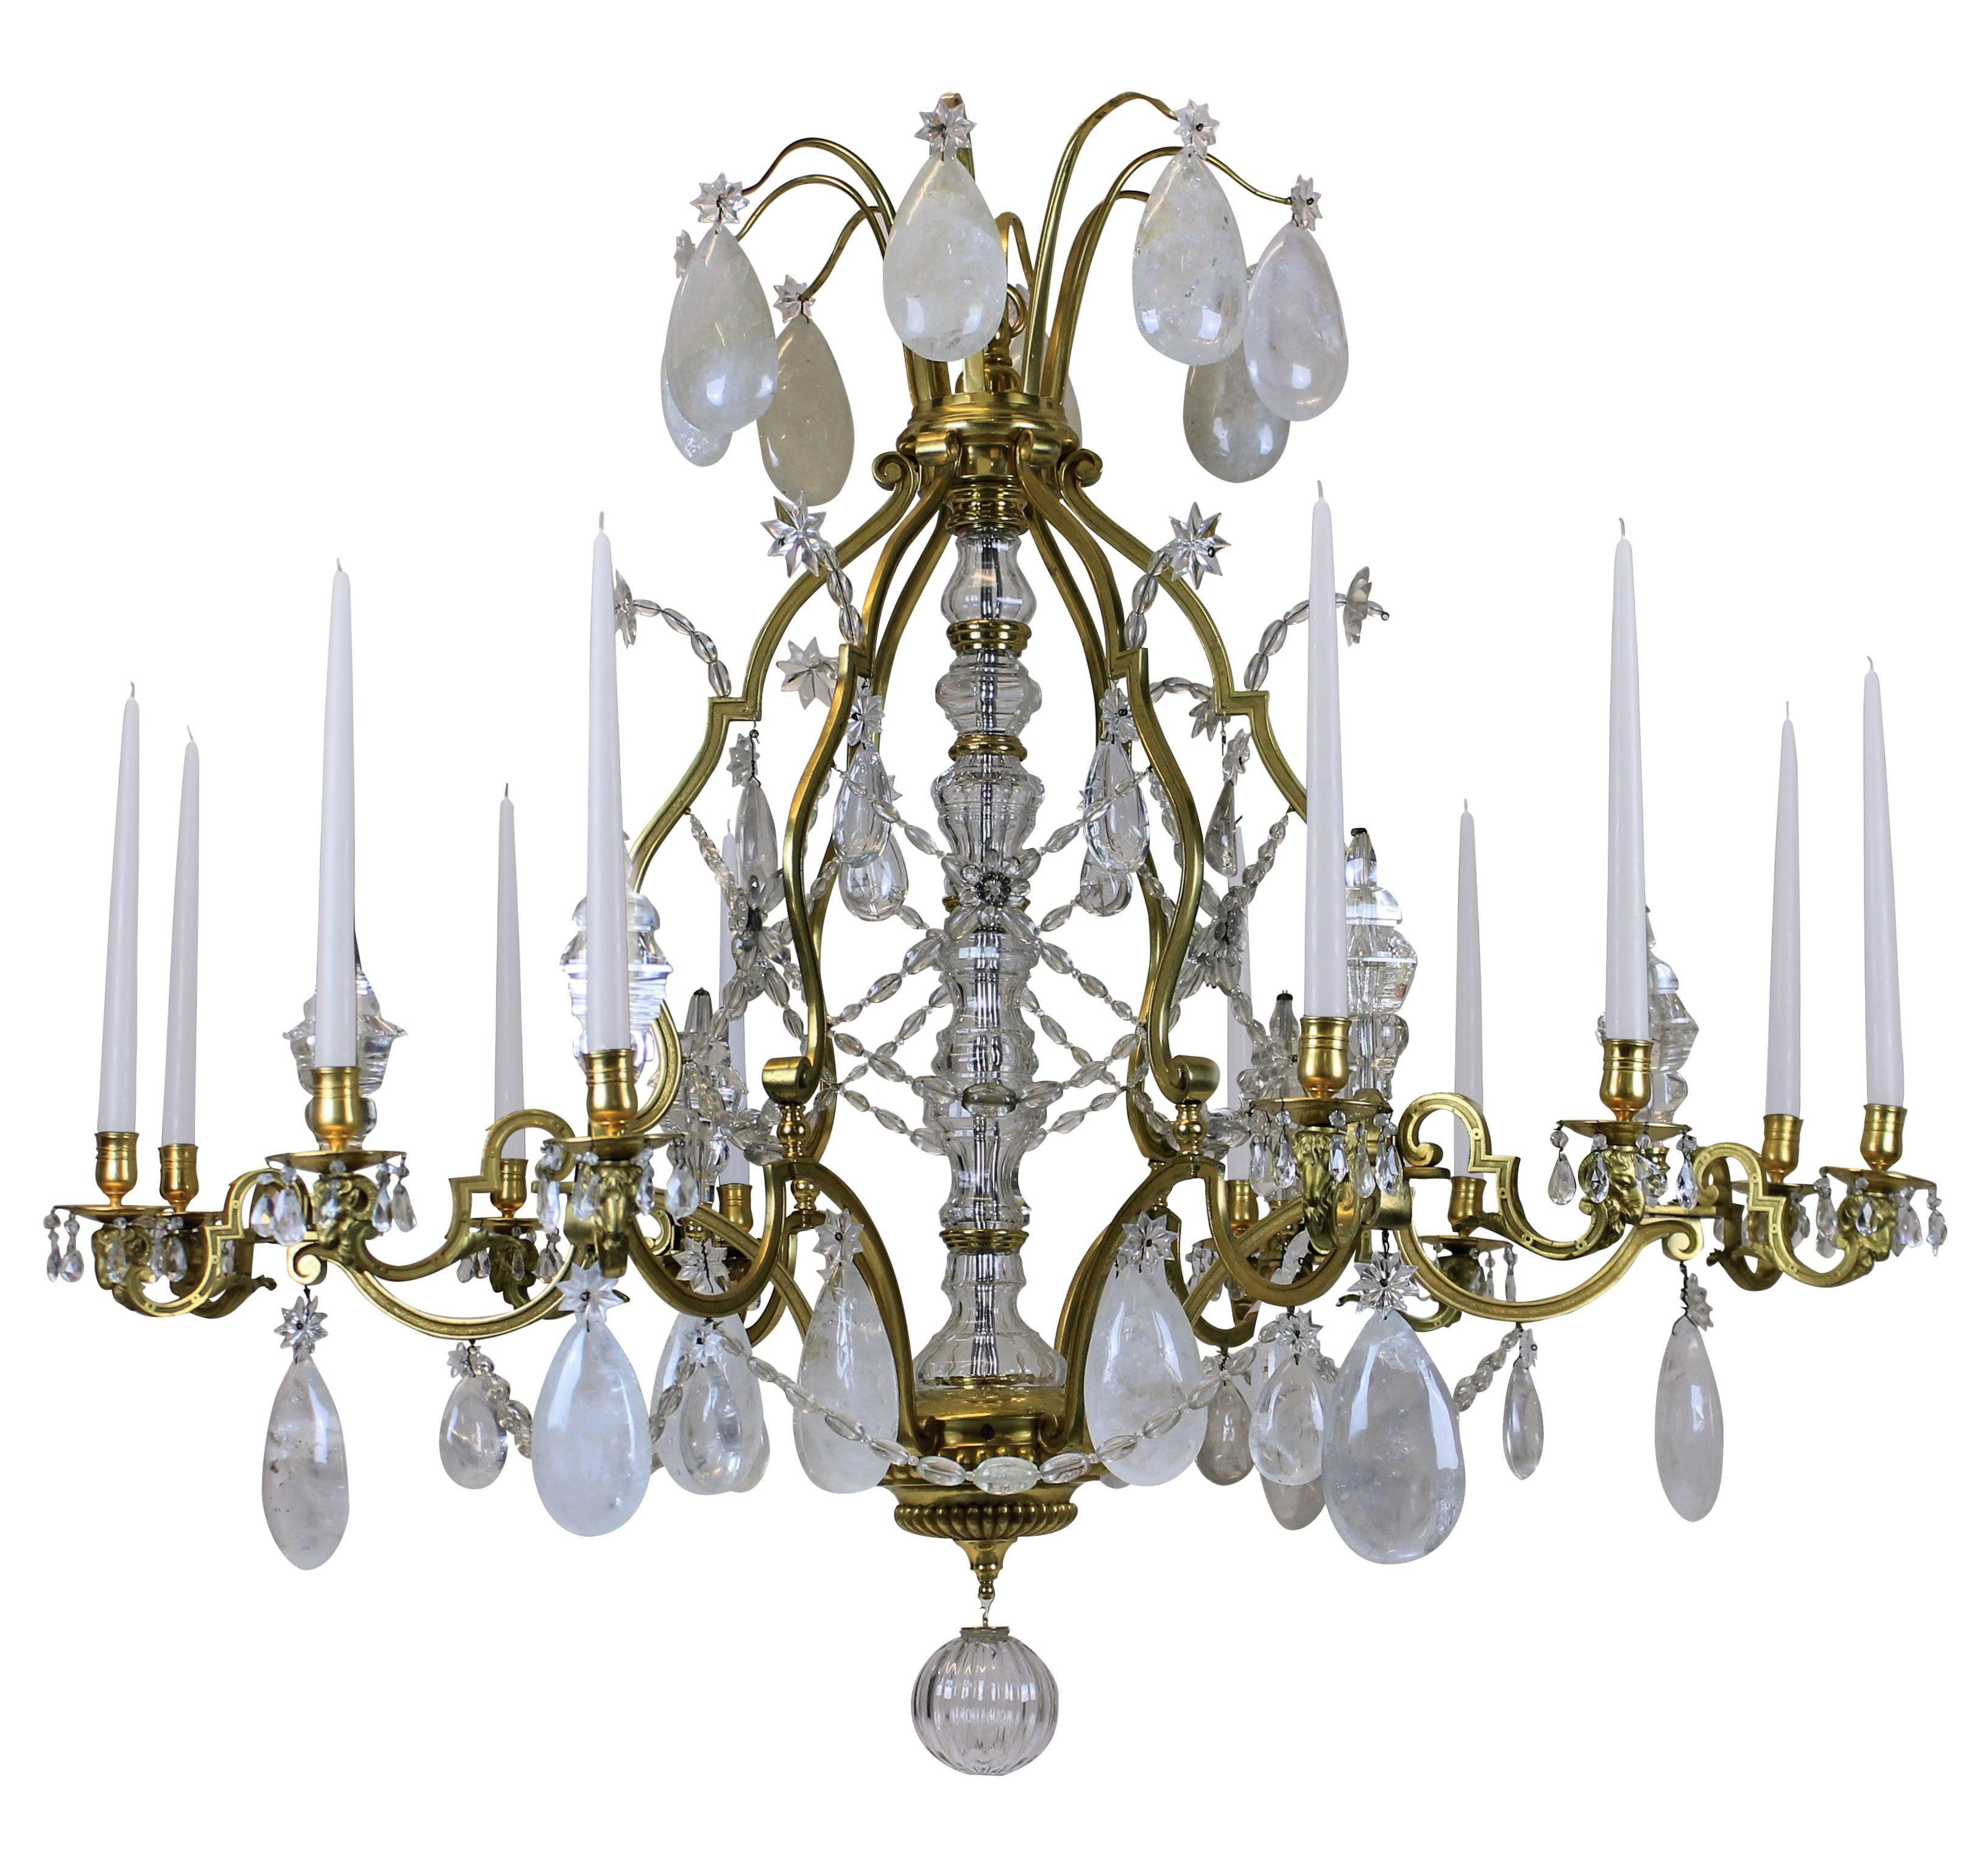 This Louis XIV chandelier is monumental in scale and is of the highest quality of mercury gilded bronze and hung with rock crystal. Of superb proportions and detail. With ram's head decoration to each arm, of which there are twelve in total, with